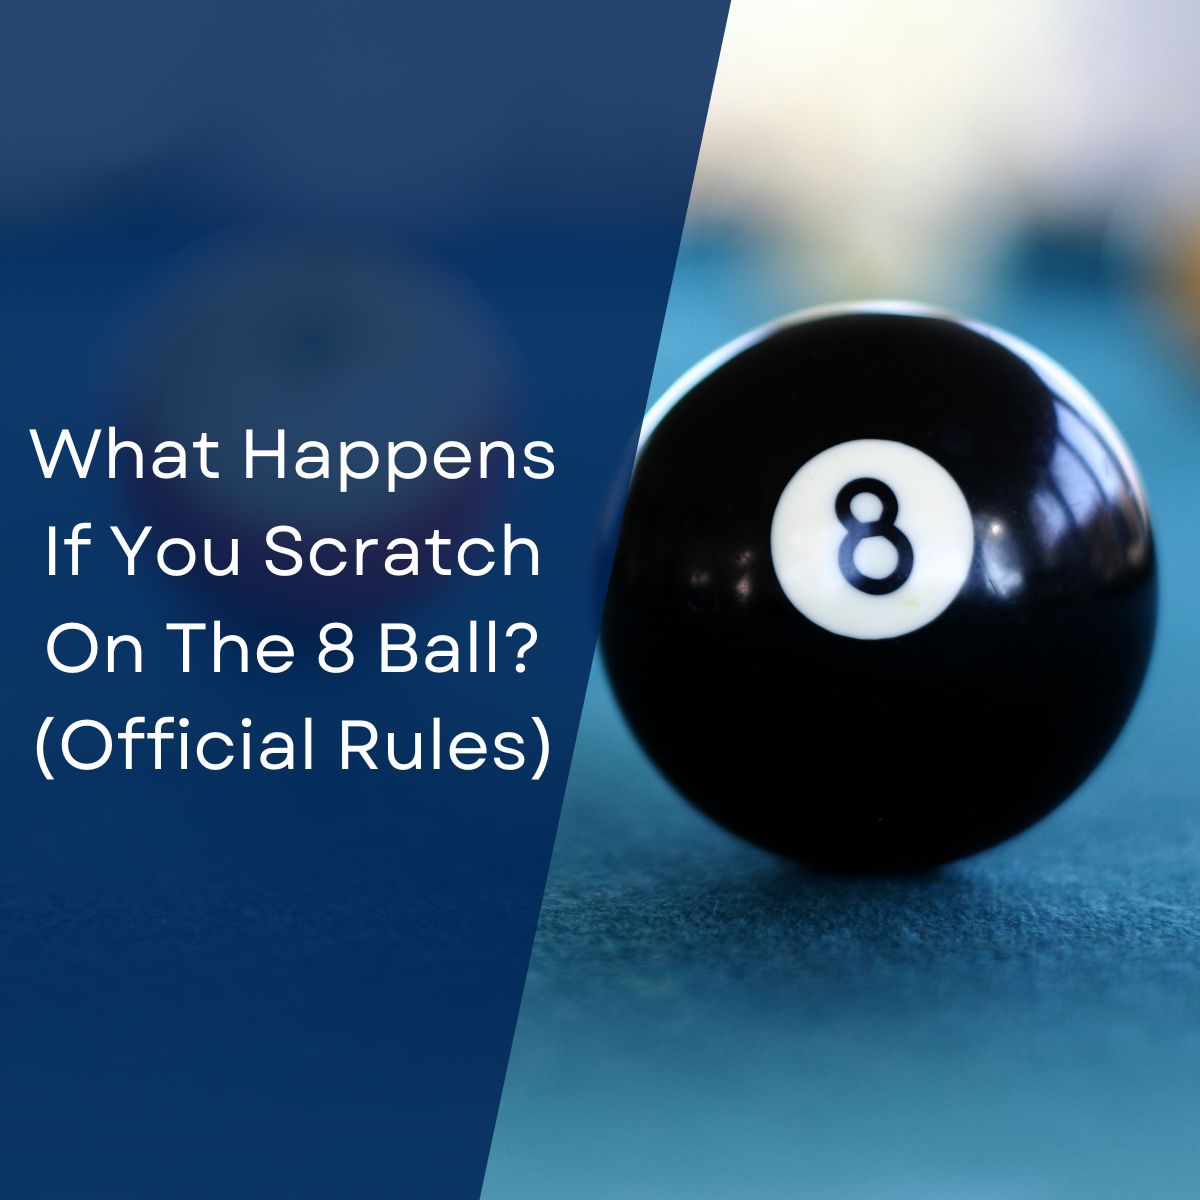 What Happens if You Scratch on the 8-Ball